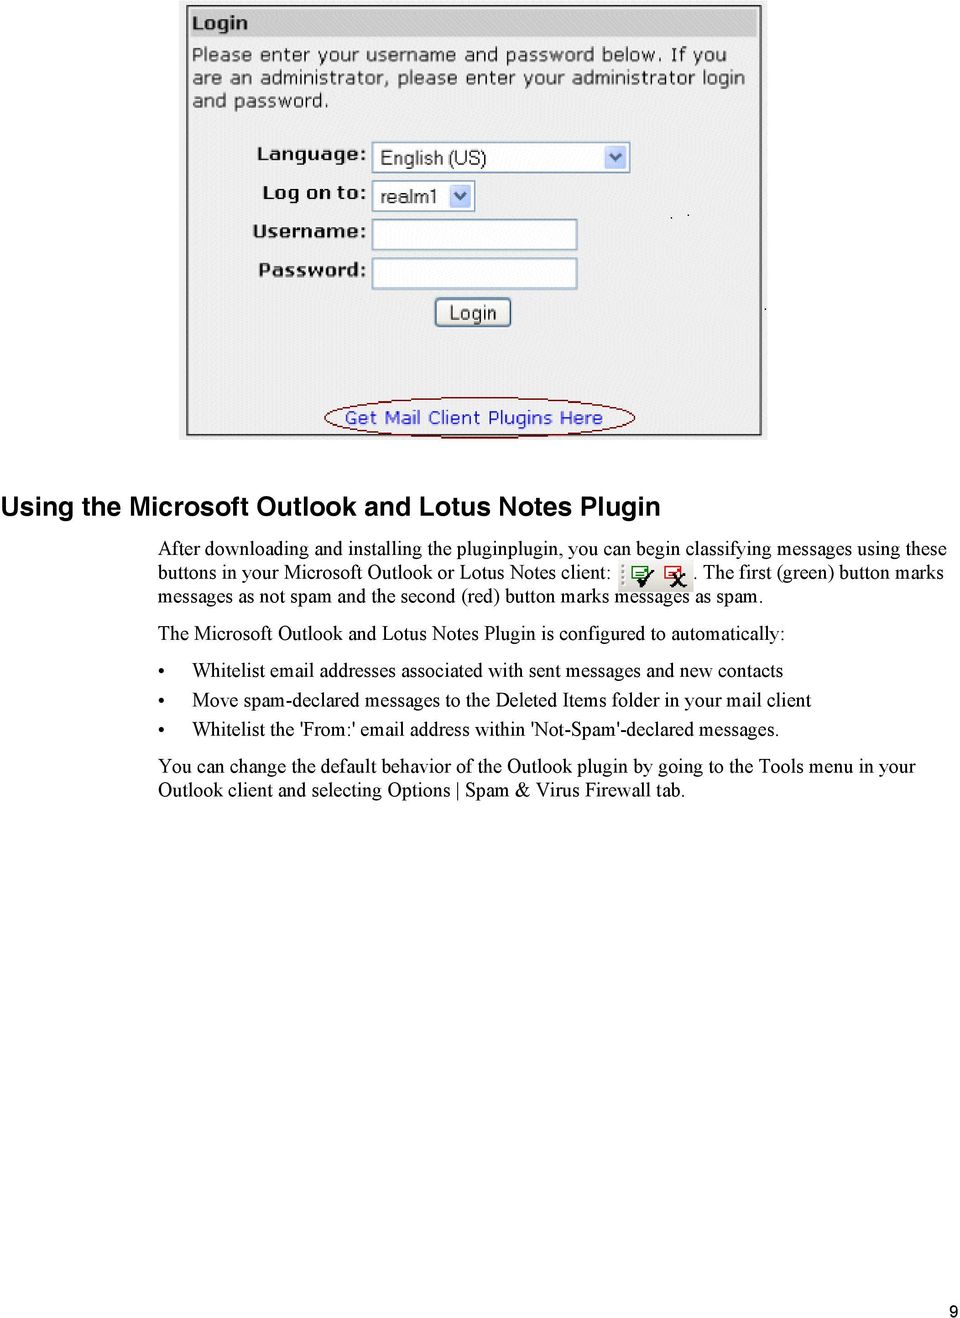 The Microsoft Outlook and Lotus Notes Plugin is configured to automatically: Whitelist email addresses associated with sent messages and new contacts Move spam-declared messages to the